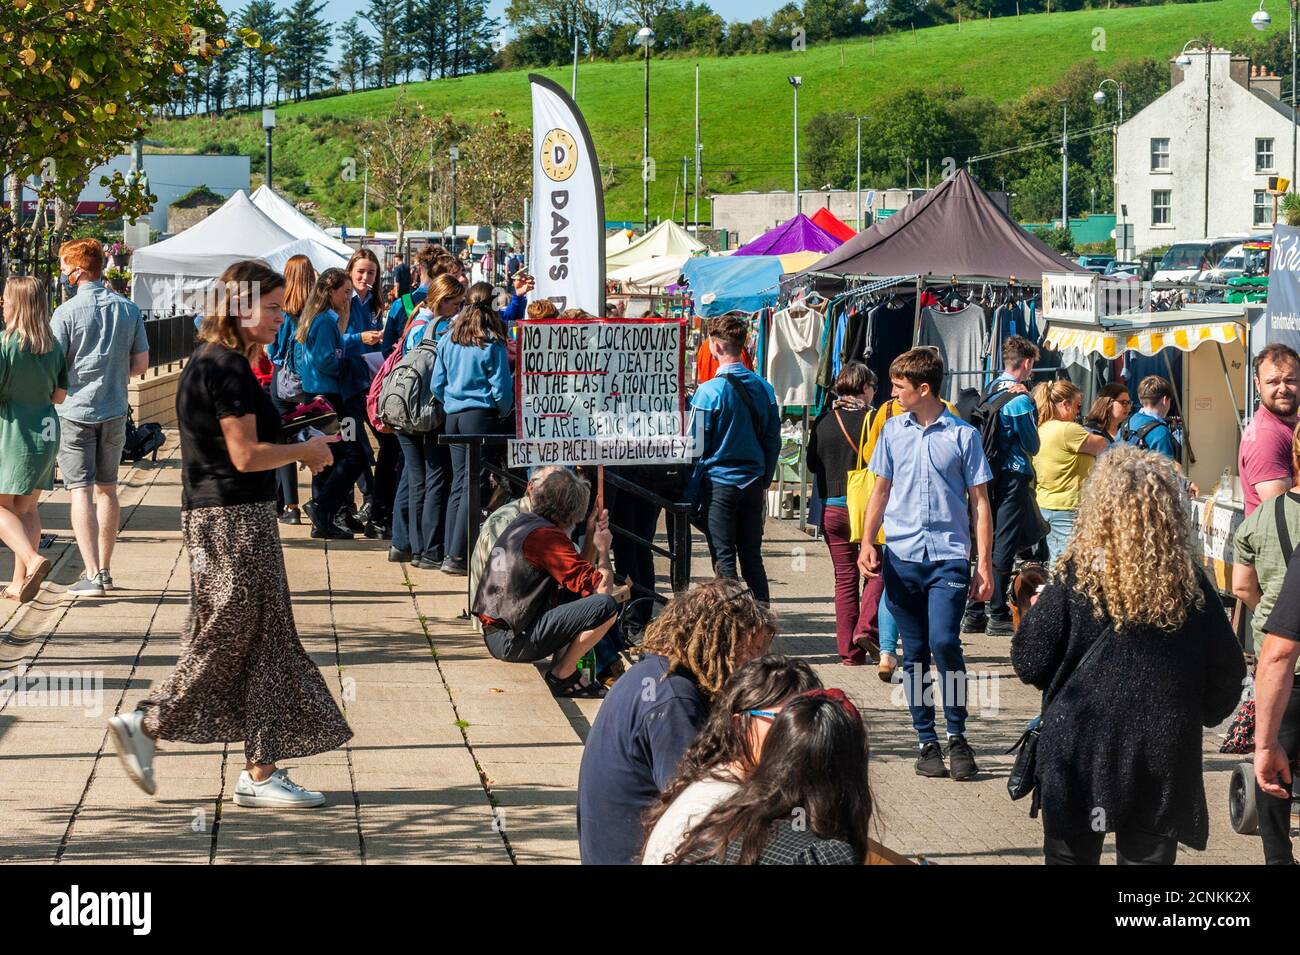 Bantry, West Cork, Ireland. 18th Sep, 2020. On a hot and sunny day in Bantry, the Friday Market was very busy with locals and tourists alike. There was a distinct lack of face mask wearers and social distancing at the busy Friday market. Credit: AG News/Alamy Live News Stock Photo